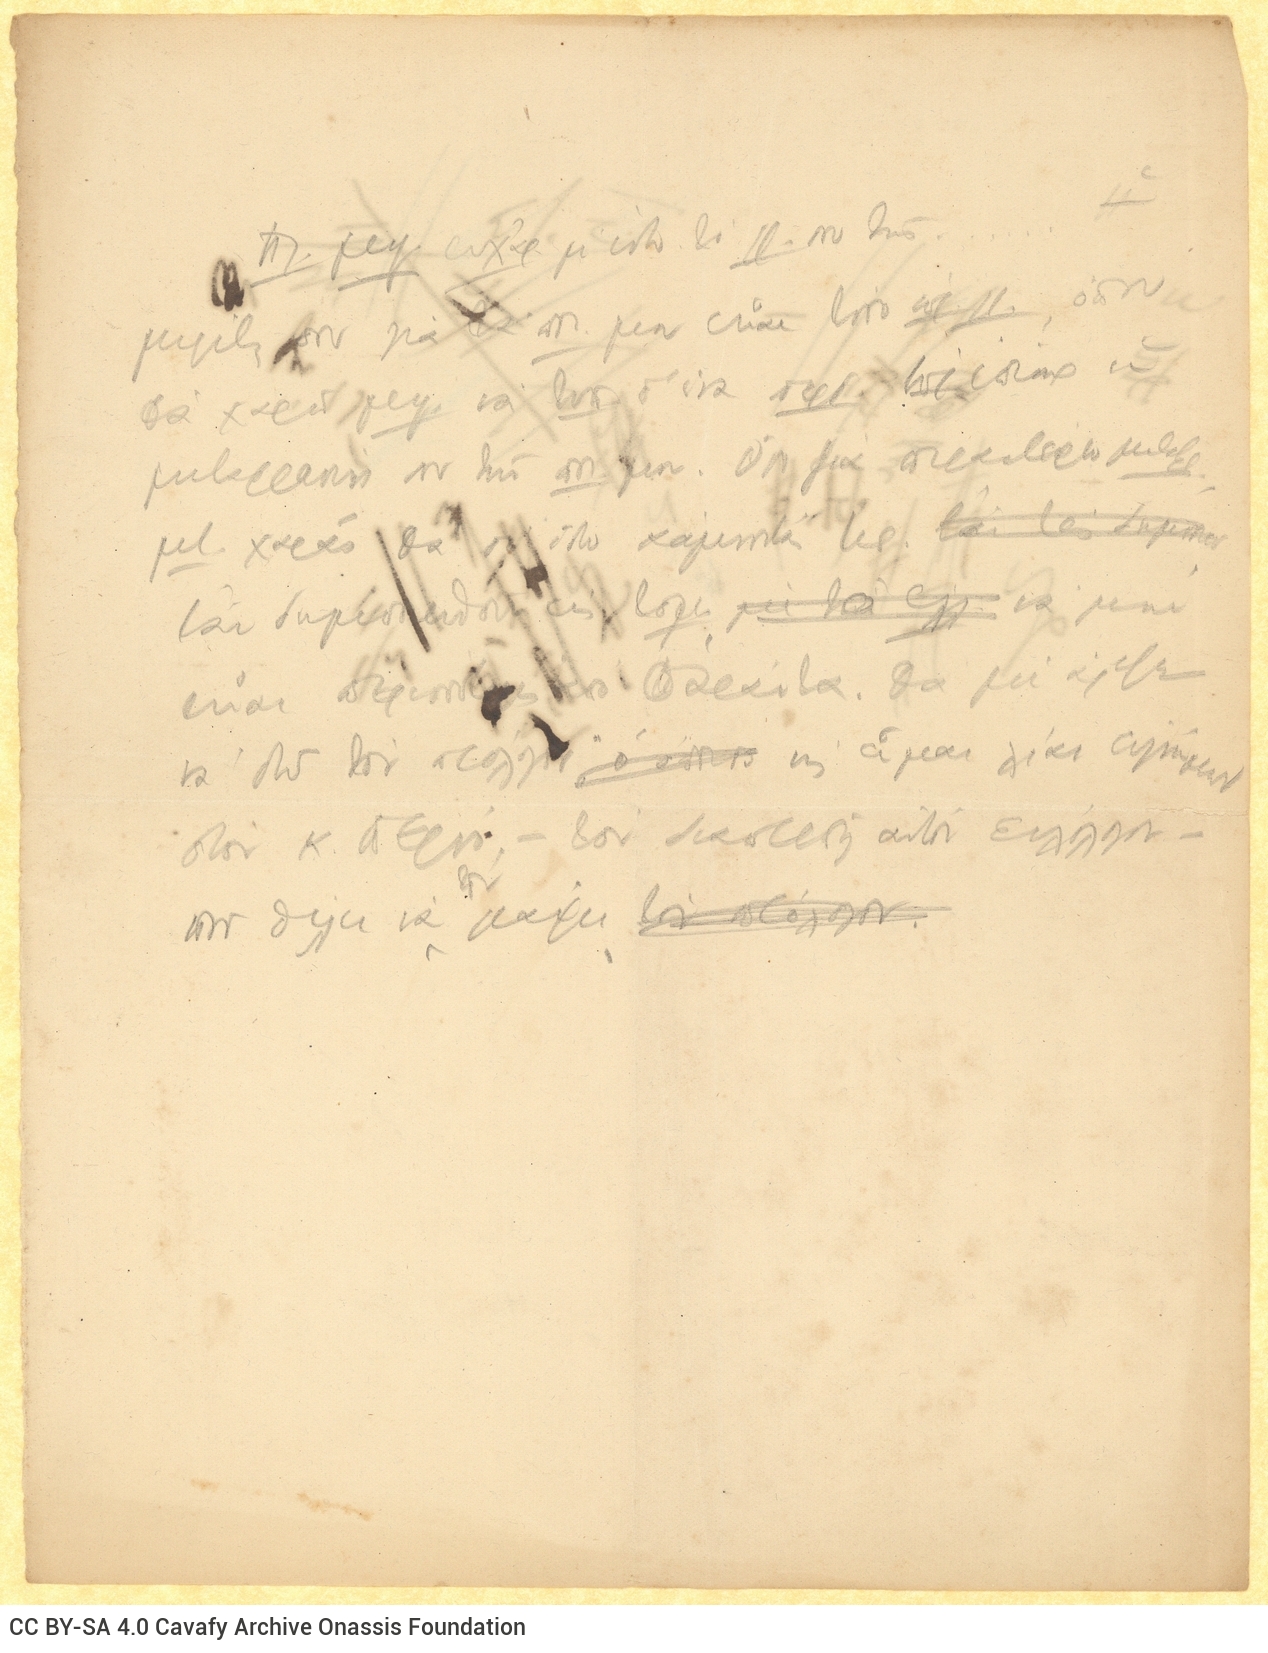 Handwritten draft letter by Cavafy on one side of a sheet. References to translation and publication matters, as well as to H